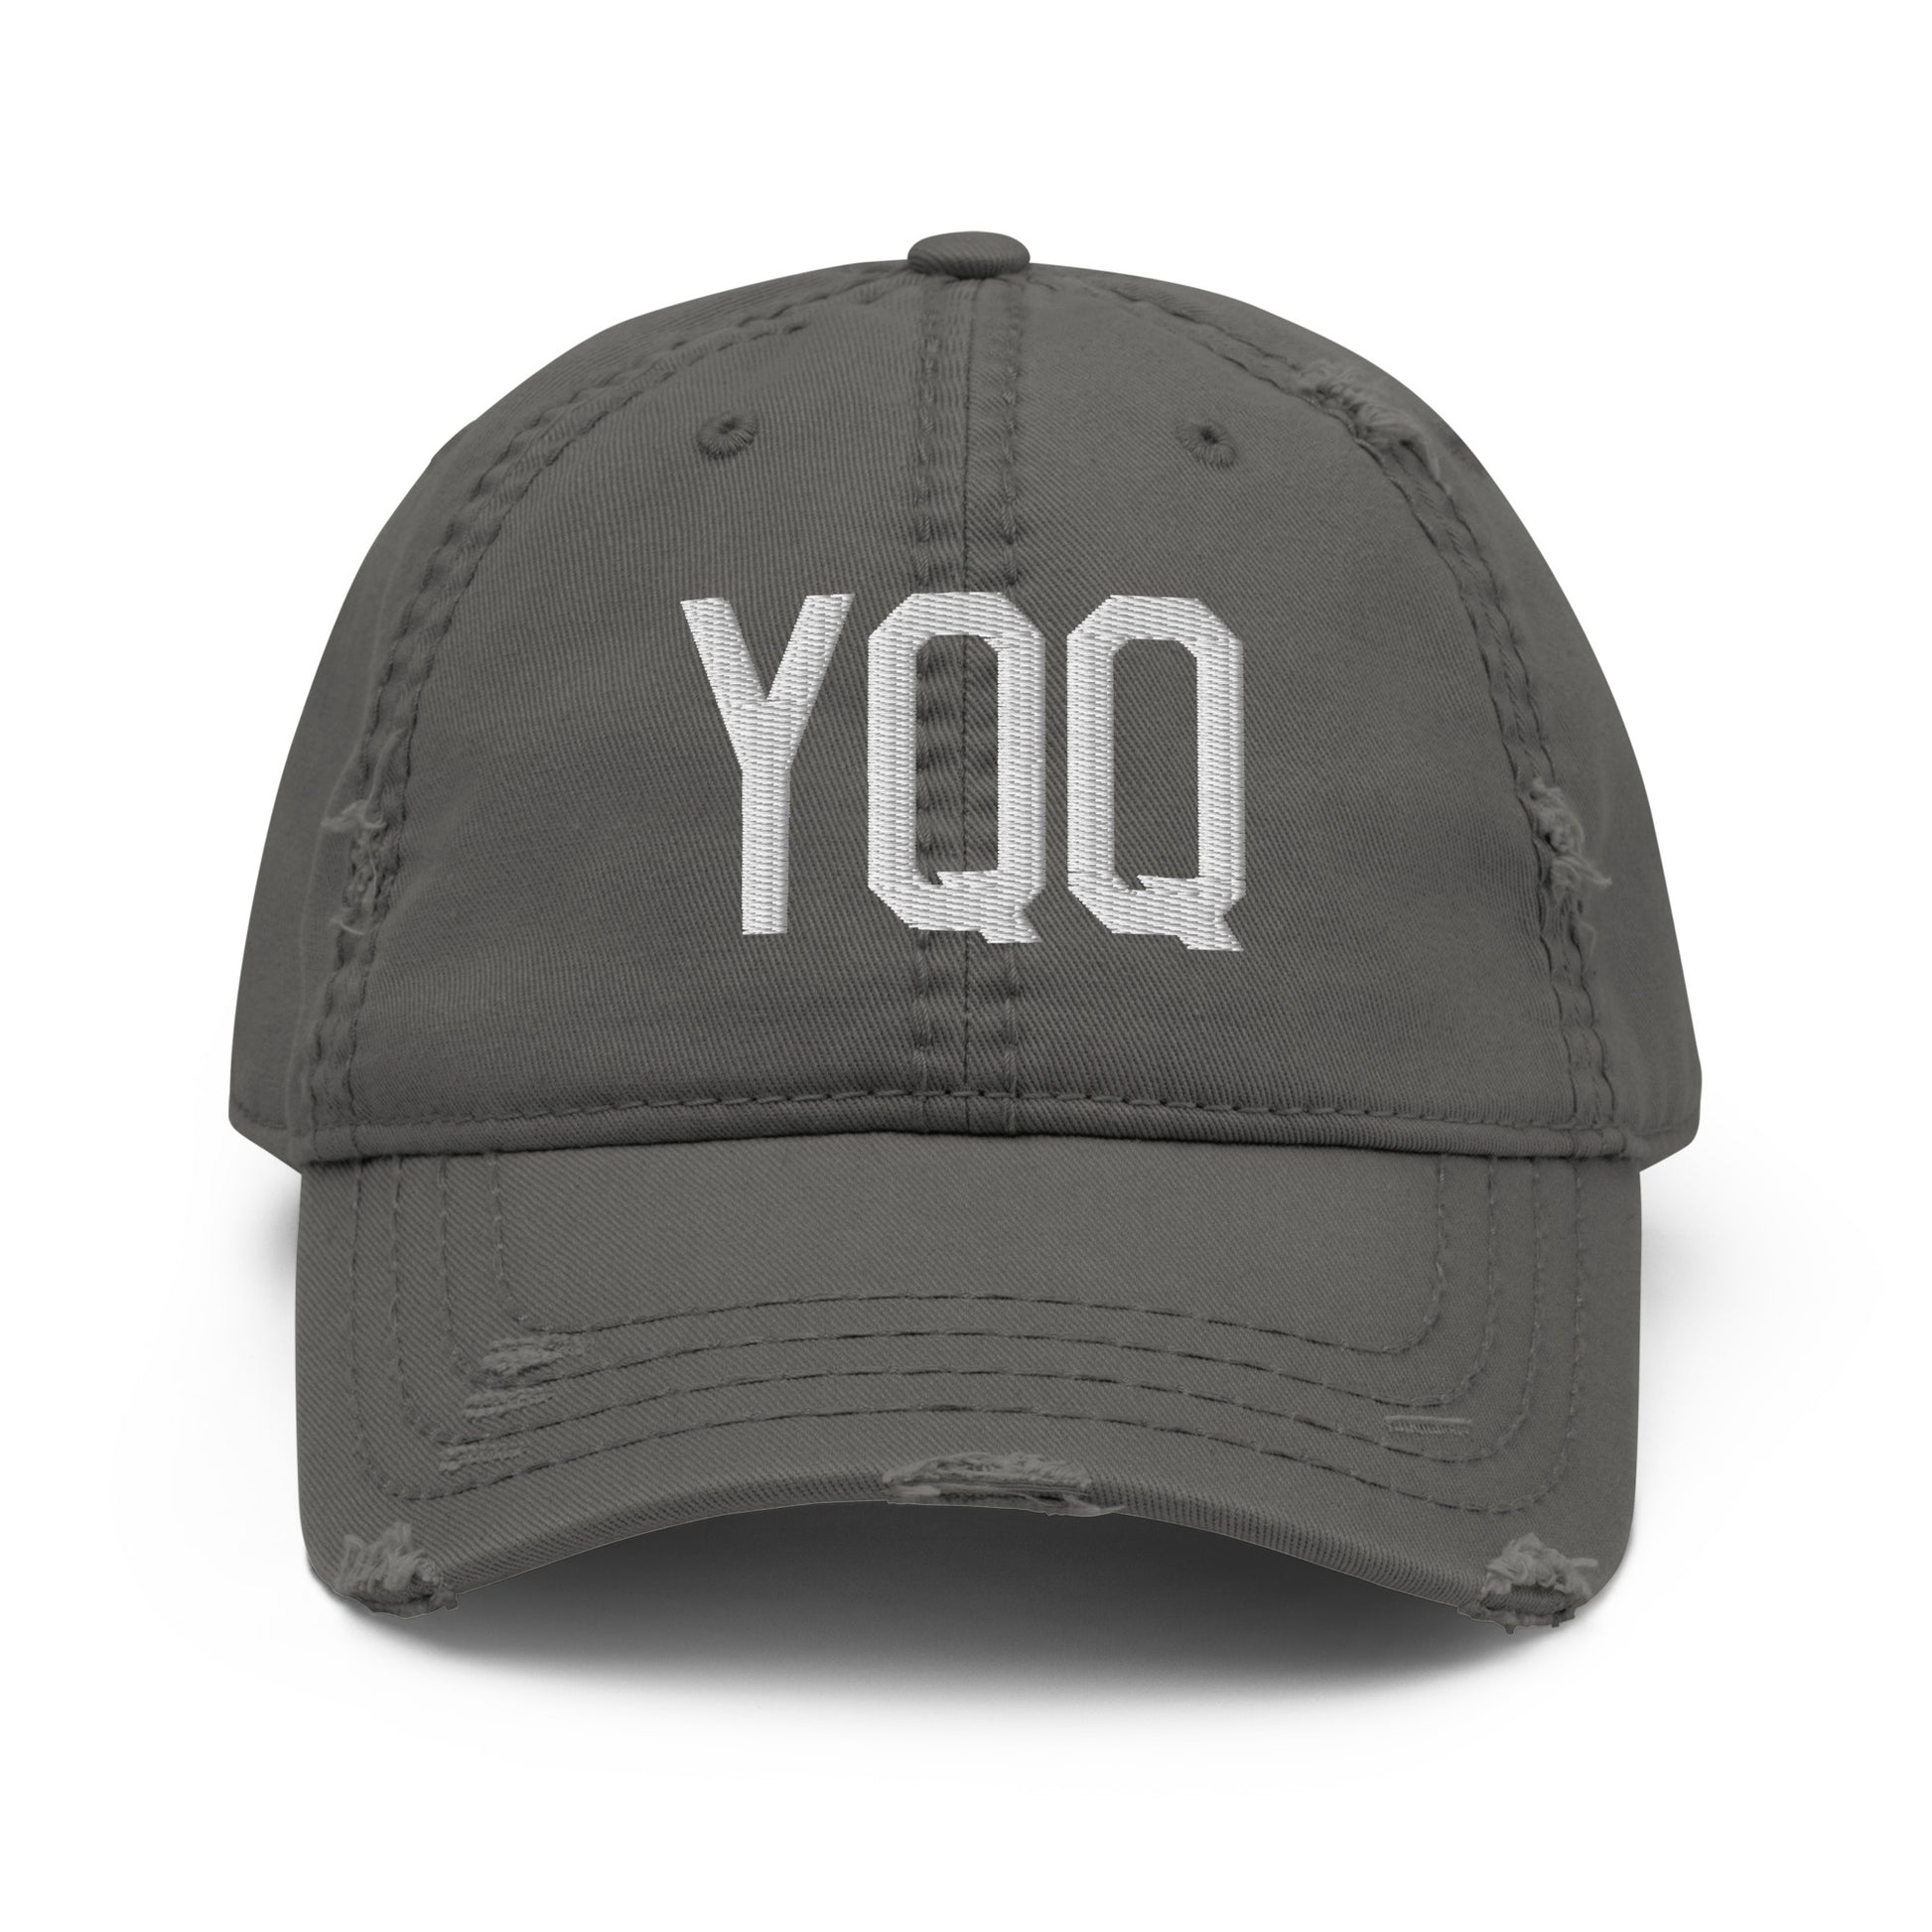 Airport Code Distressed Hat - White • YQQ Comox • YHM Designs - Image 15